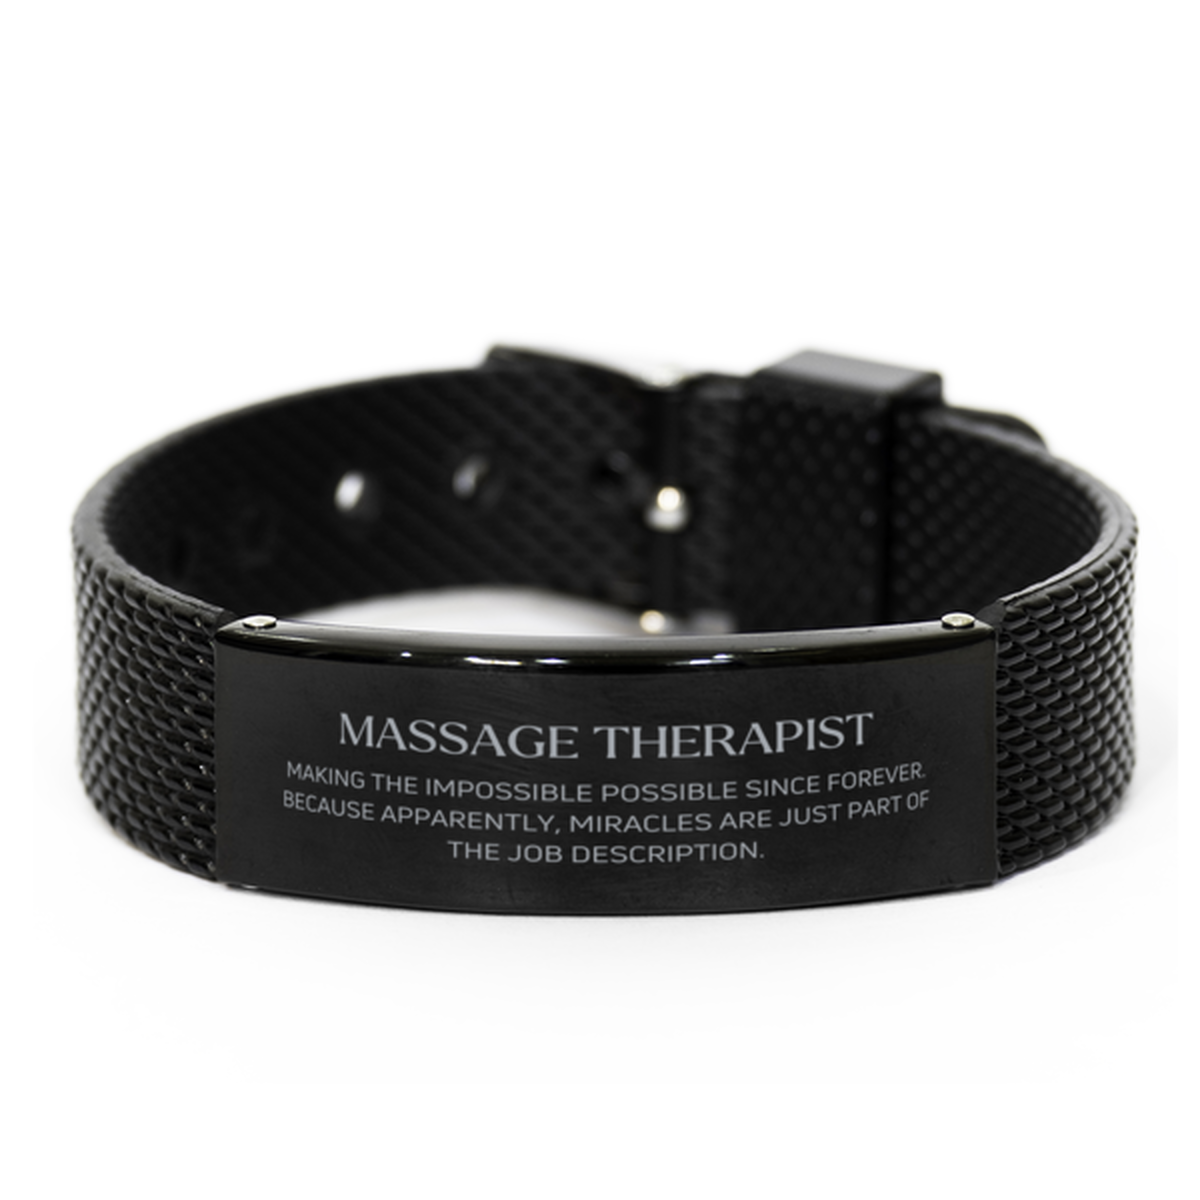 Funny Massage Therapist Gifts, Miracles are just part of the job description, Inspirational Birthday Black Shark Mesh Bracelet For Massage Therapist, Men, Women, Coworkers, Friends, Boss